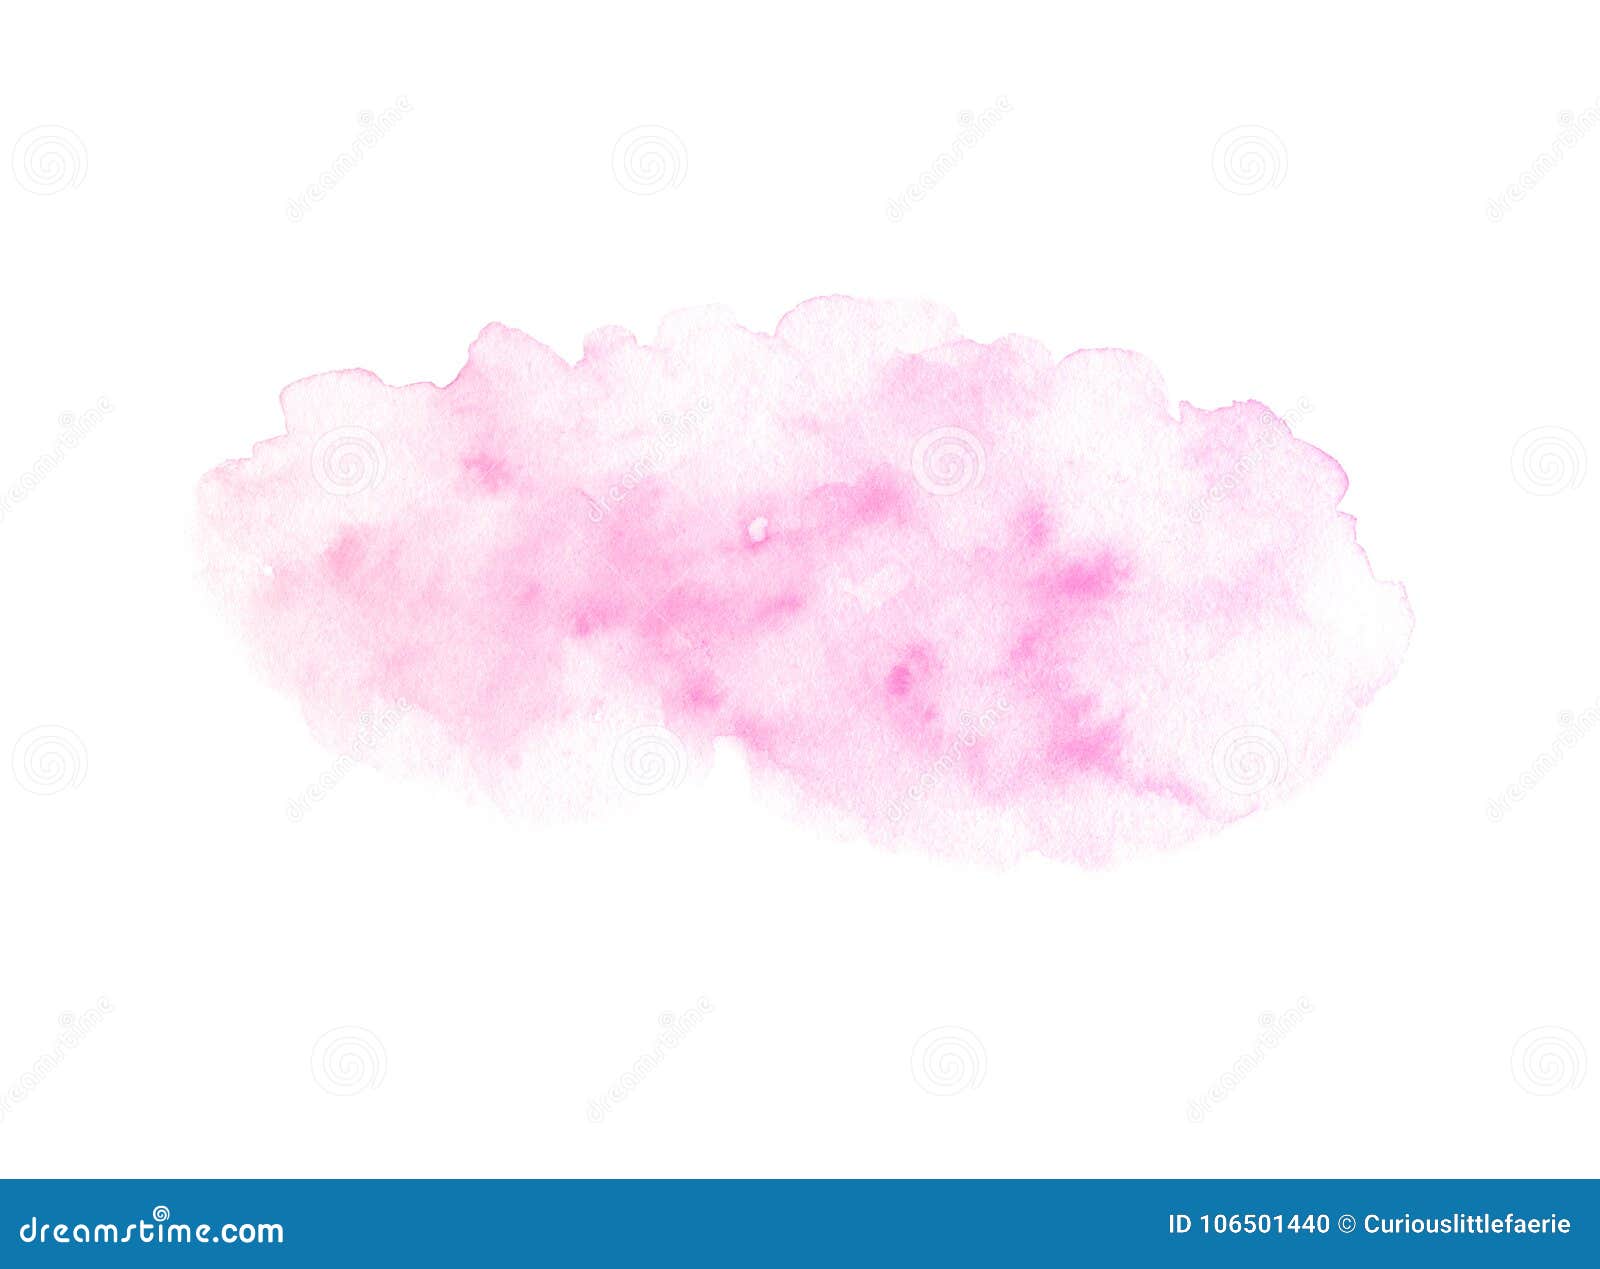 hand painted pink watercolor texture  on the white background. usable as a template